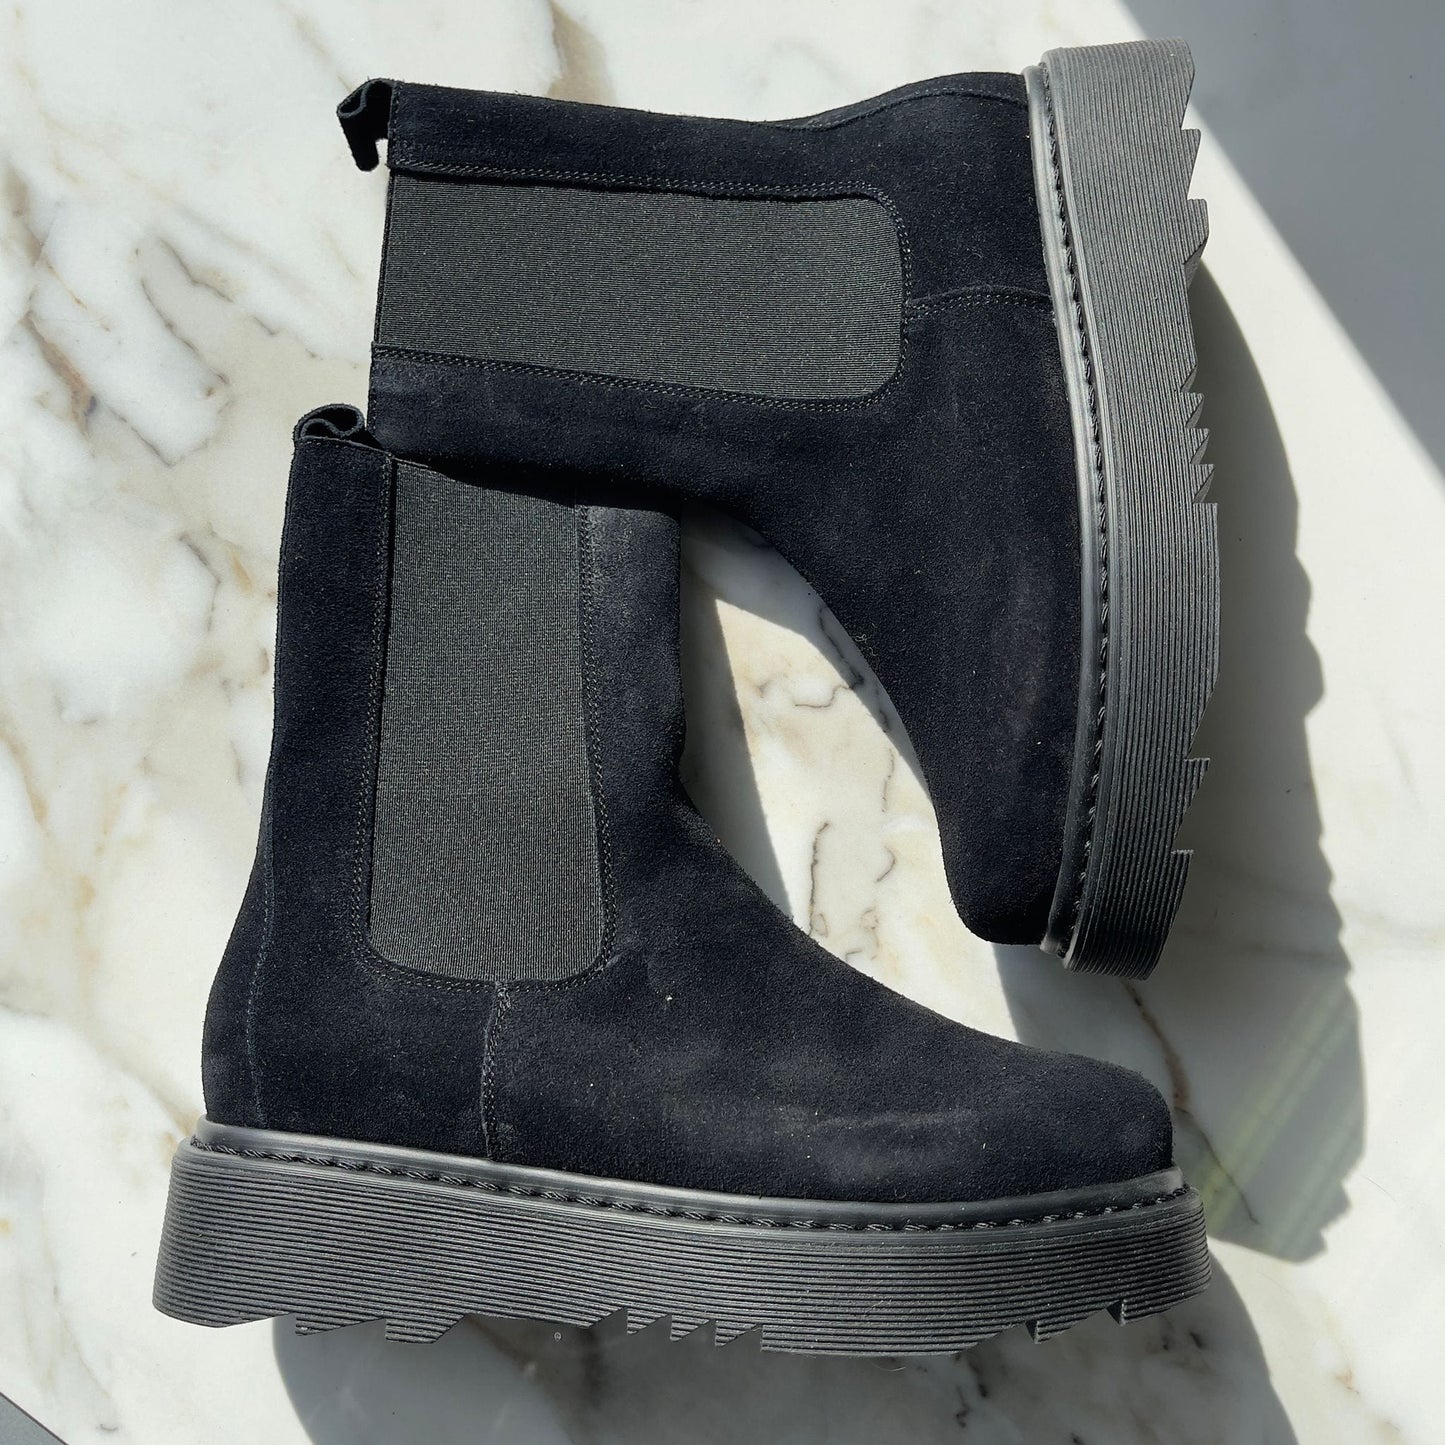 Petite black suede leather stomper boots.